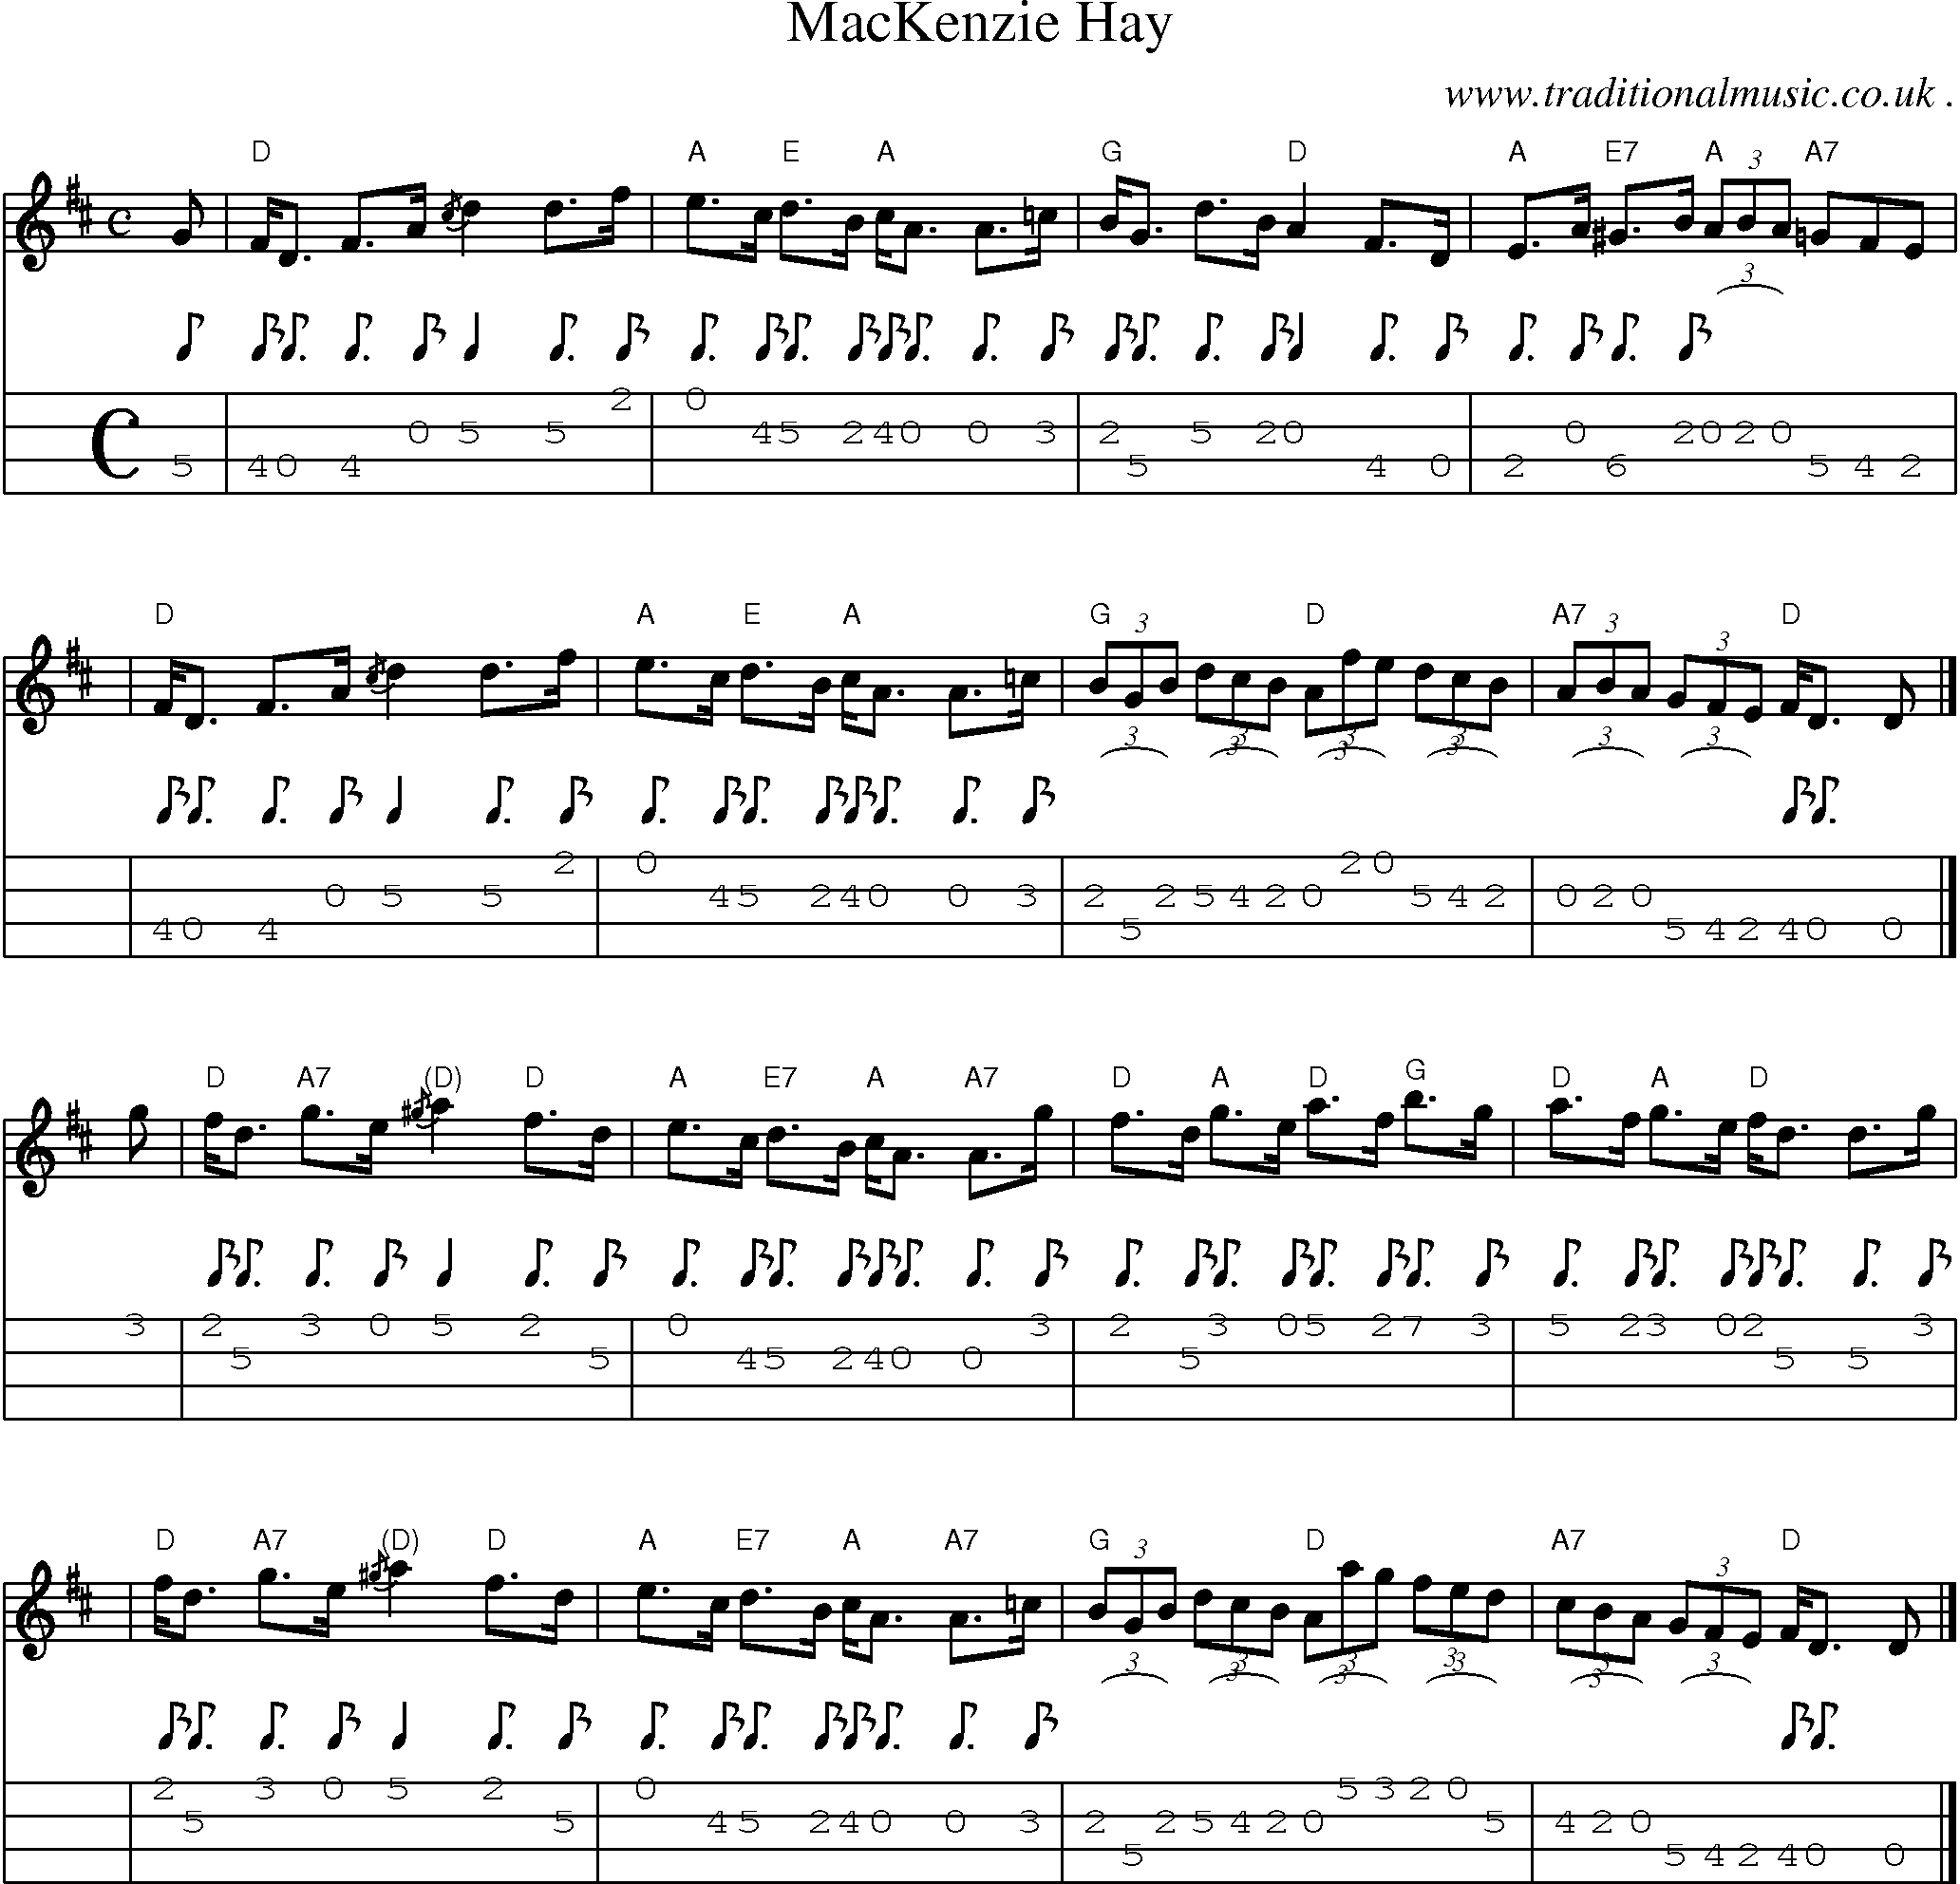 Sheet-music  score, Chords and Mandolin Tabs for Mackenzie Hay